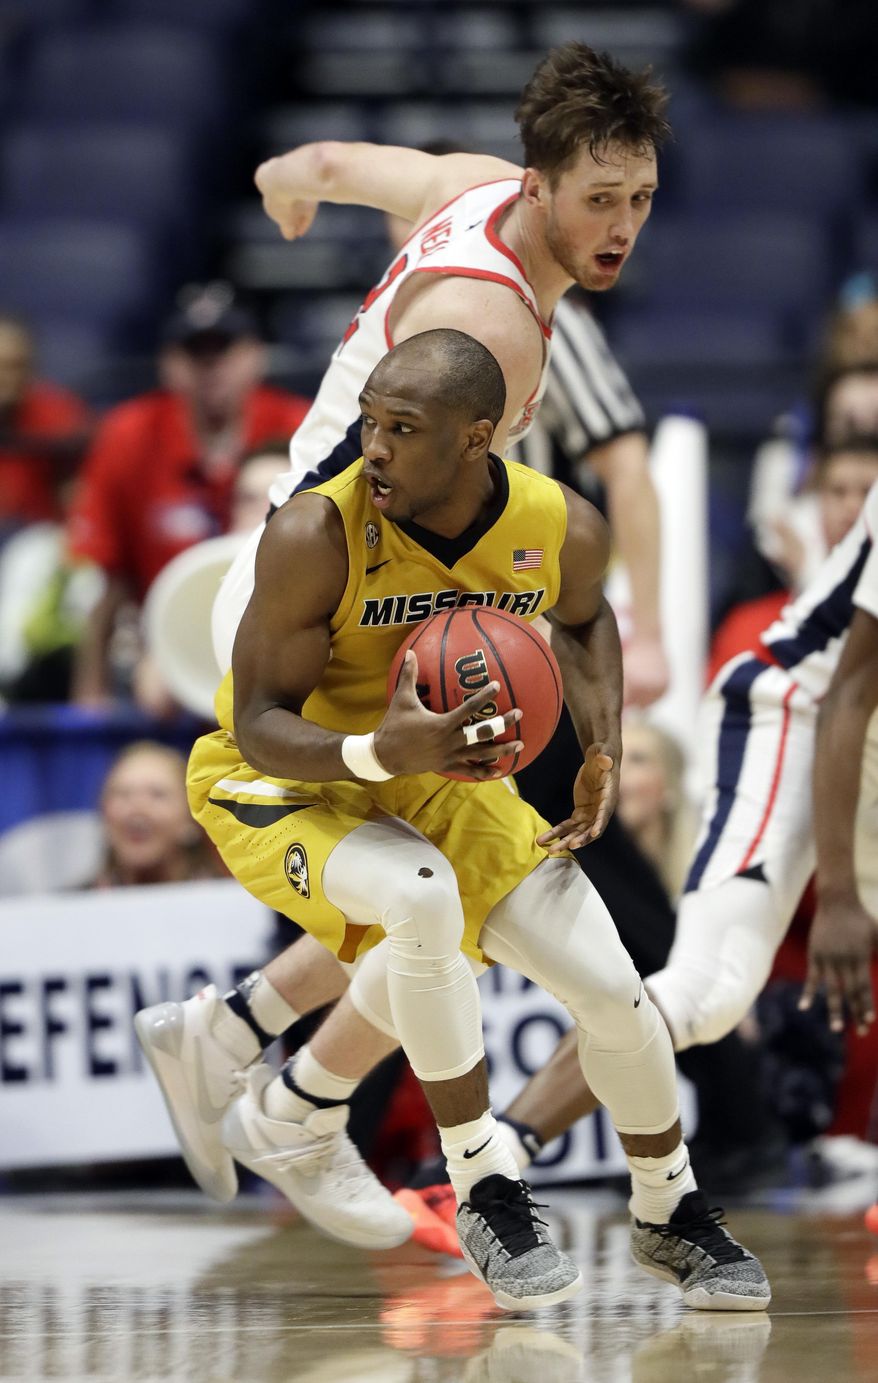 Missouri guard Terrence Phillips, front protects the ball from Mississippi&#39;s Cullen Neal, top, during the first half of an NCAA college basketball game at the Southeastern Conference tournament Thursday, March 9, 2017, in Nashville, Tenn. (AP Photo/Wade Payne)